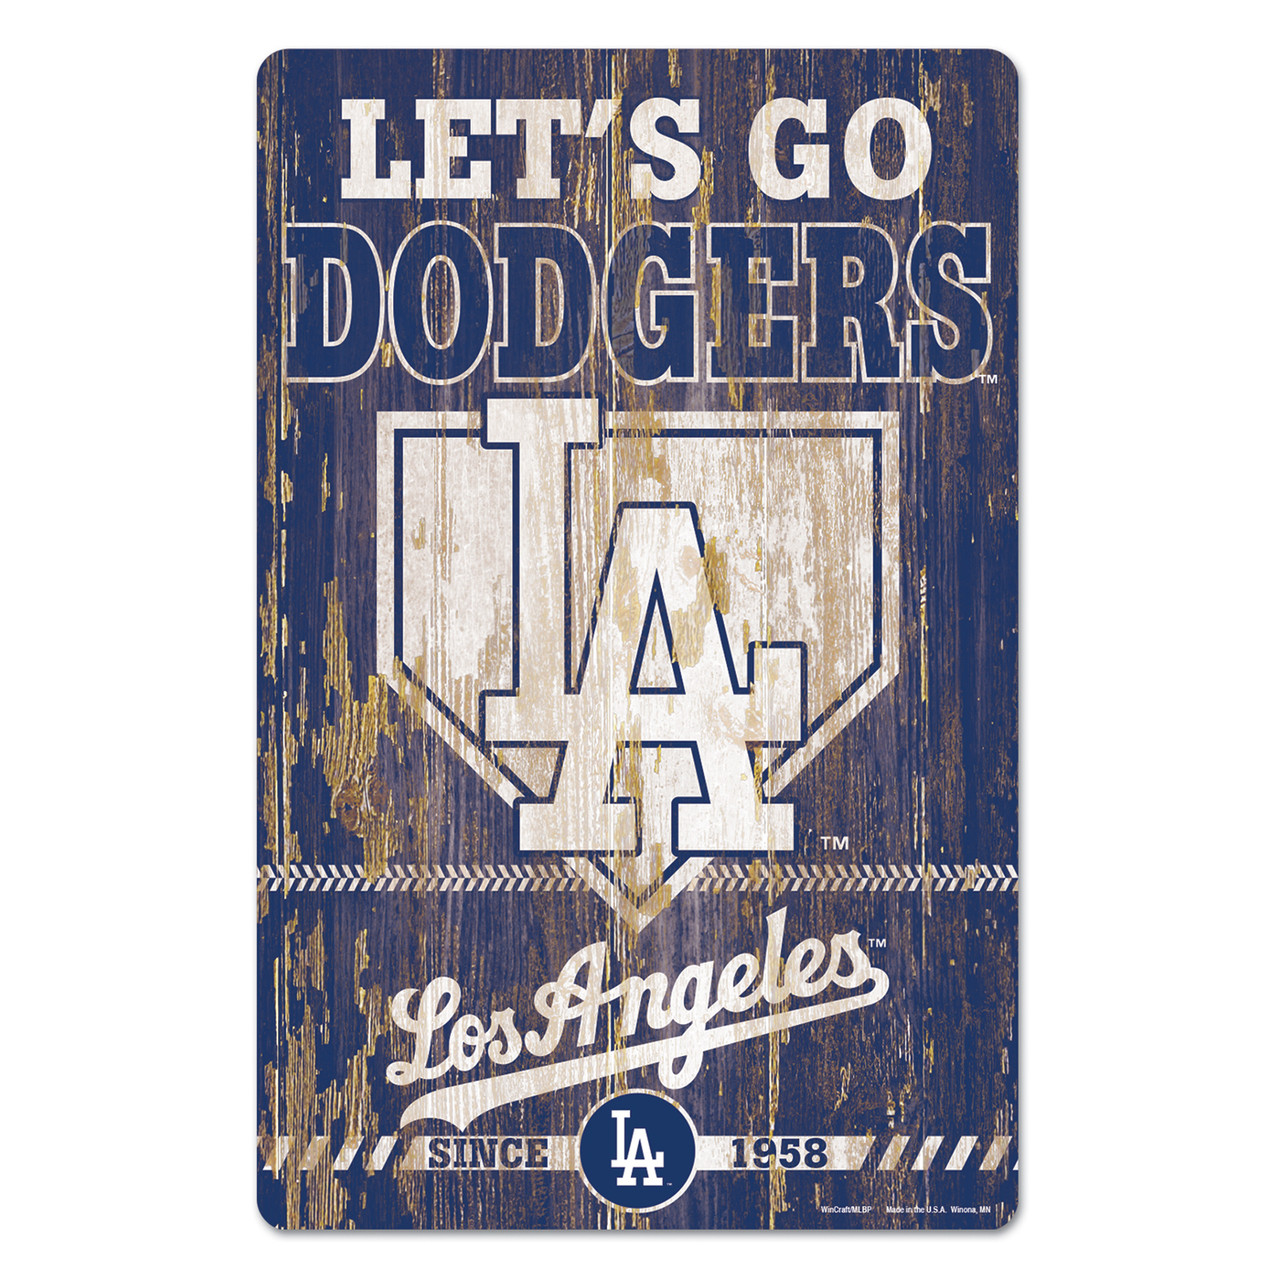 Los Angeles Dodgers Merchandise & Gifts - SportsUnlimited.com